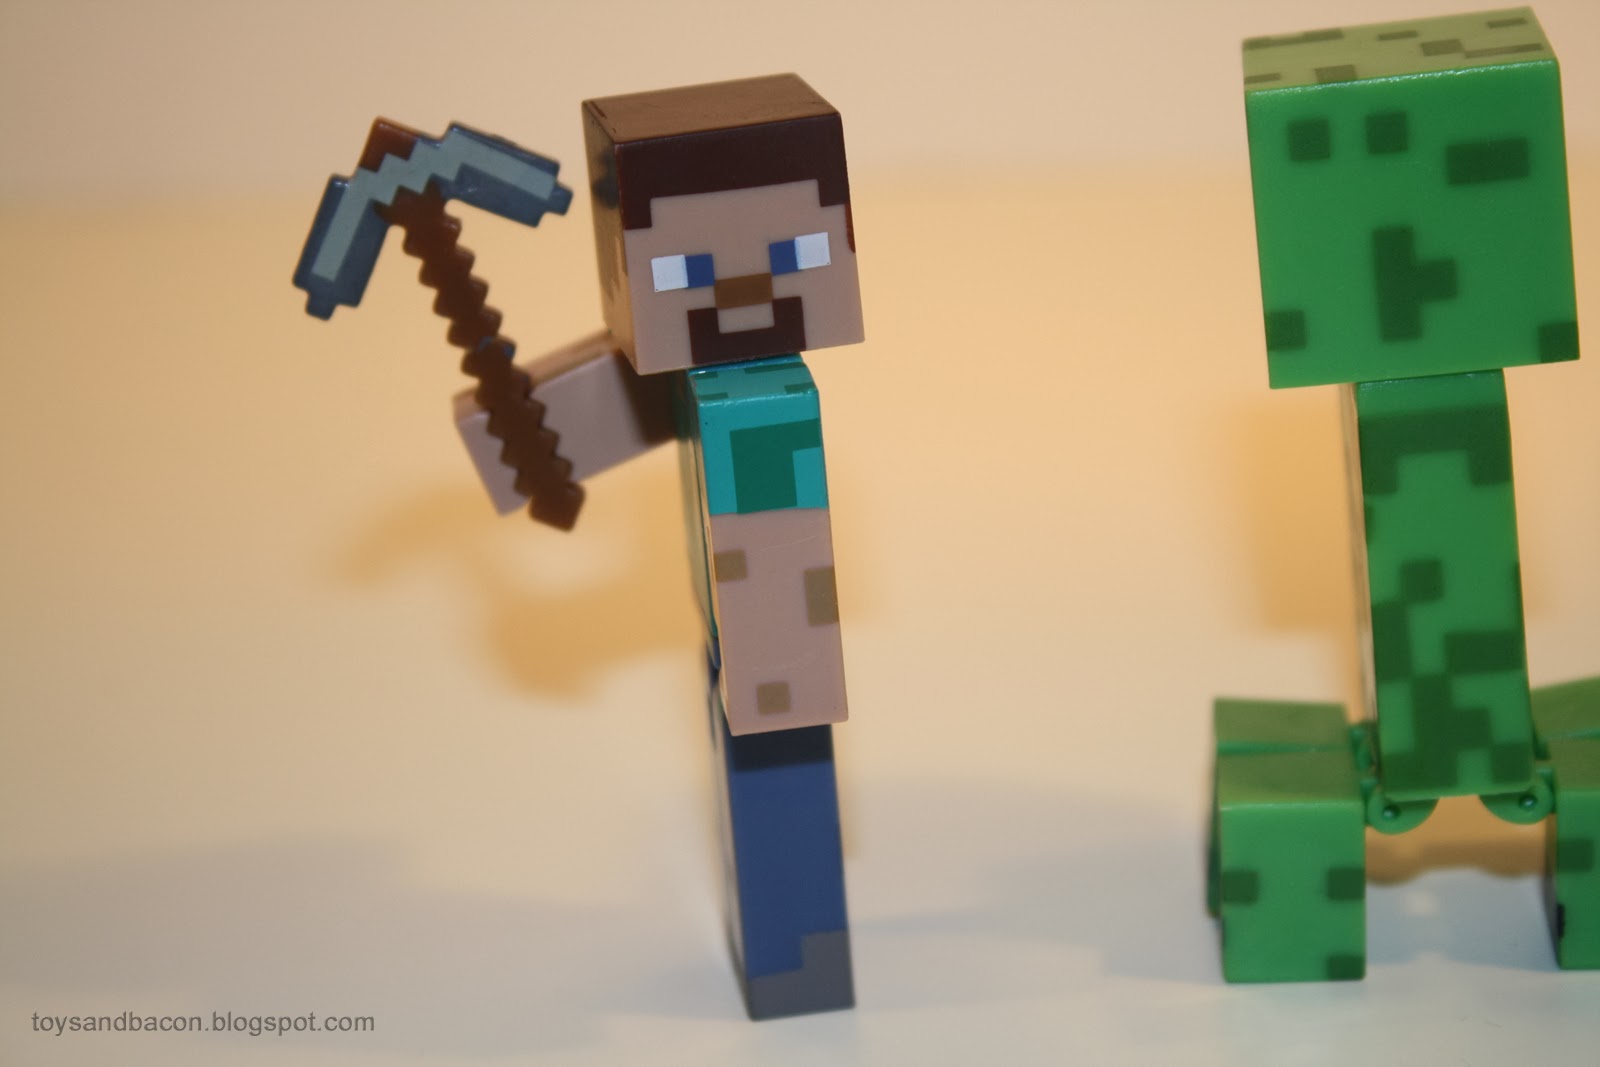 Toys and Bacon: Minecraft Action Figures - A review...?